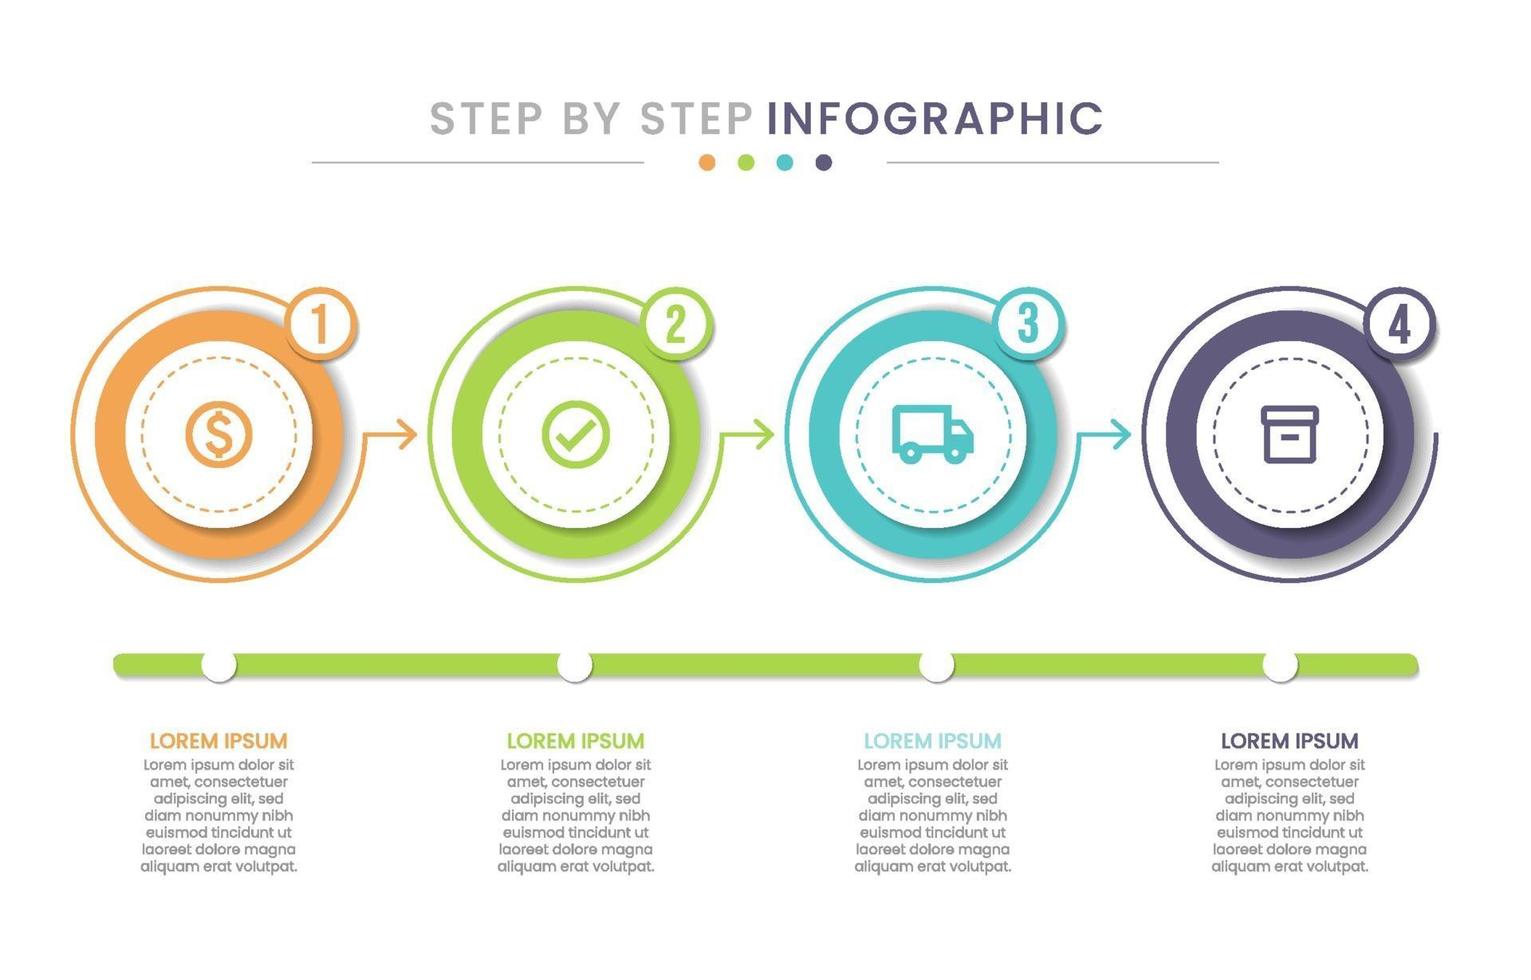 Step by step Infographic Illustration vector